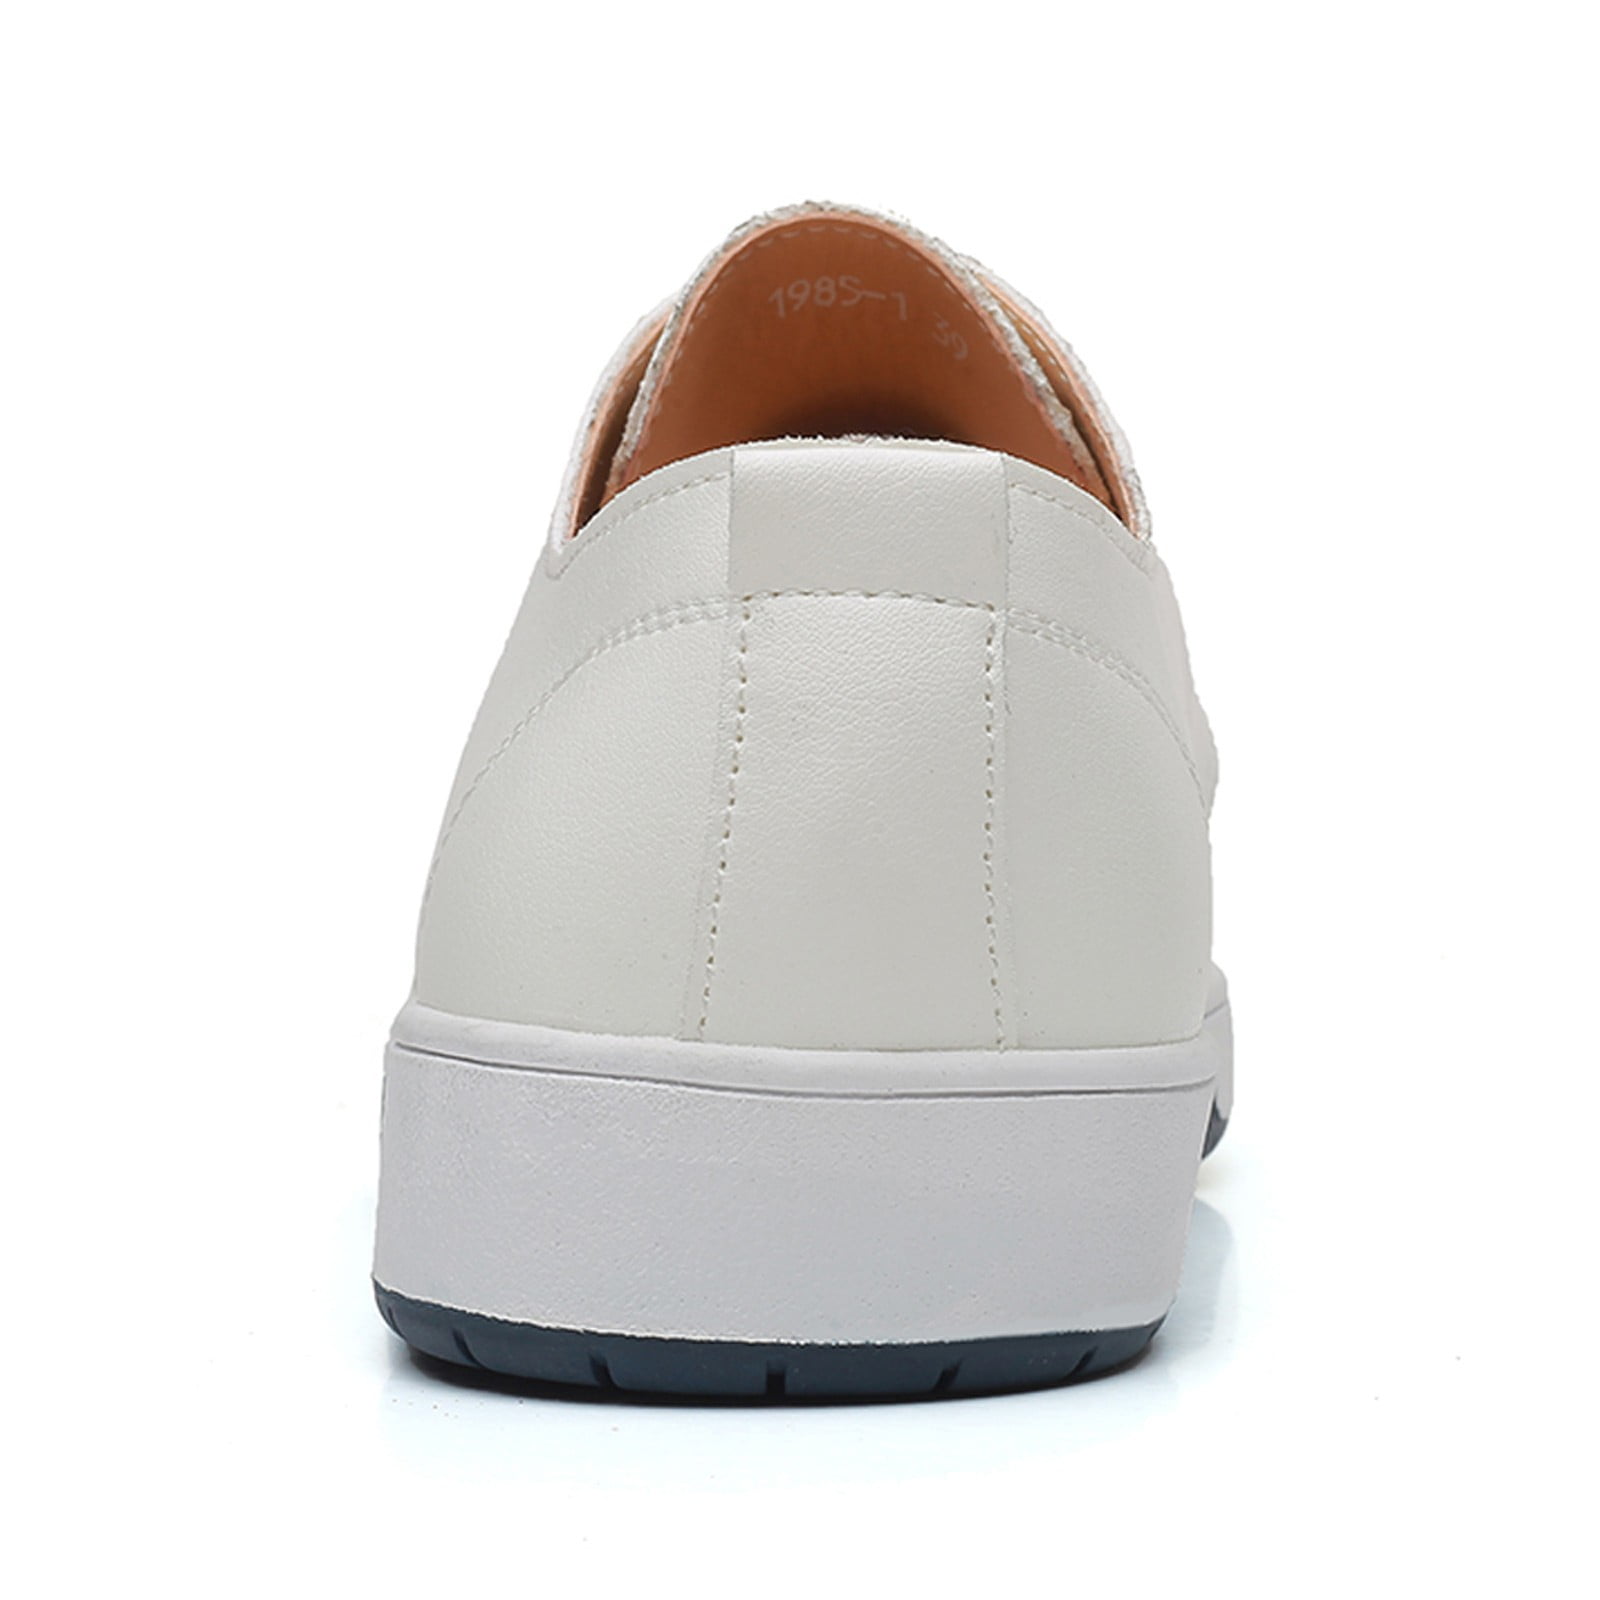 Update more than 240 white sneakers with formals latest